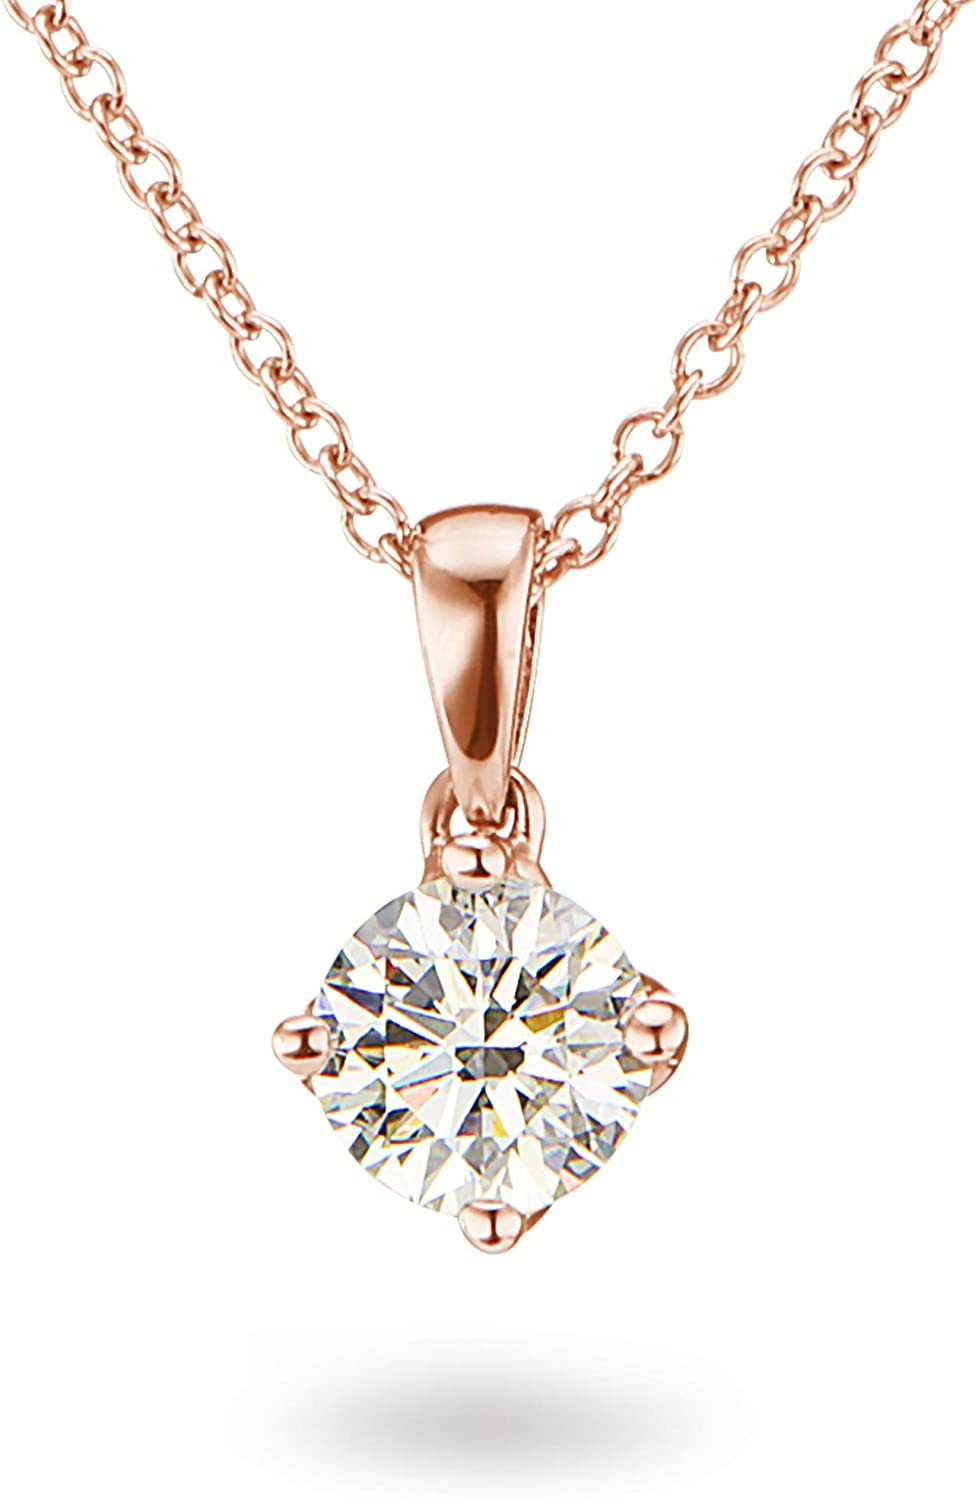 IGI Certified 14K Gold 1/4 to 2.0 Carat Round Brilliant Cut Lab Created Diamond Solitaire Pendant Necklace (G-J Color, VS1-SI2 Clarity), 18" - Choice of Carat & Gold Color